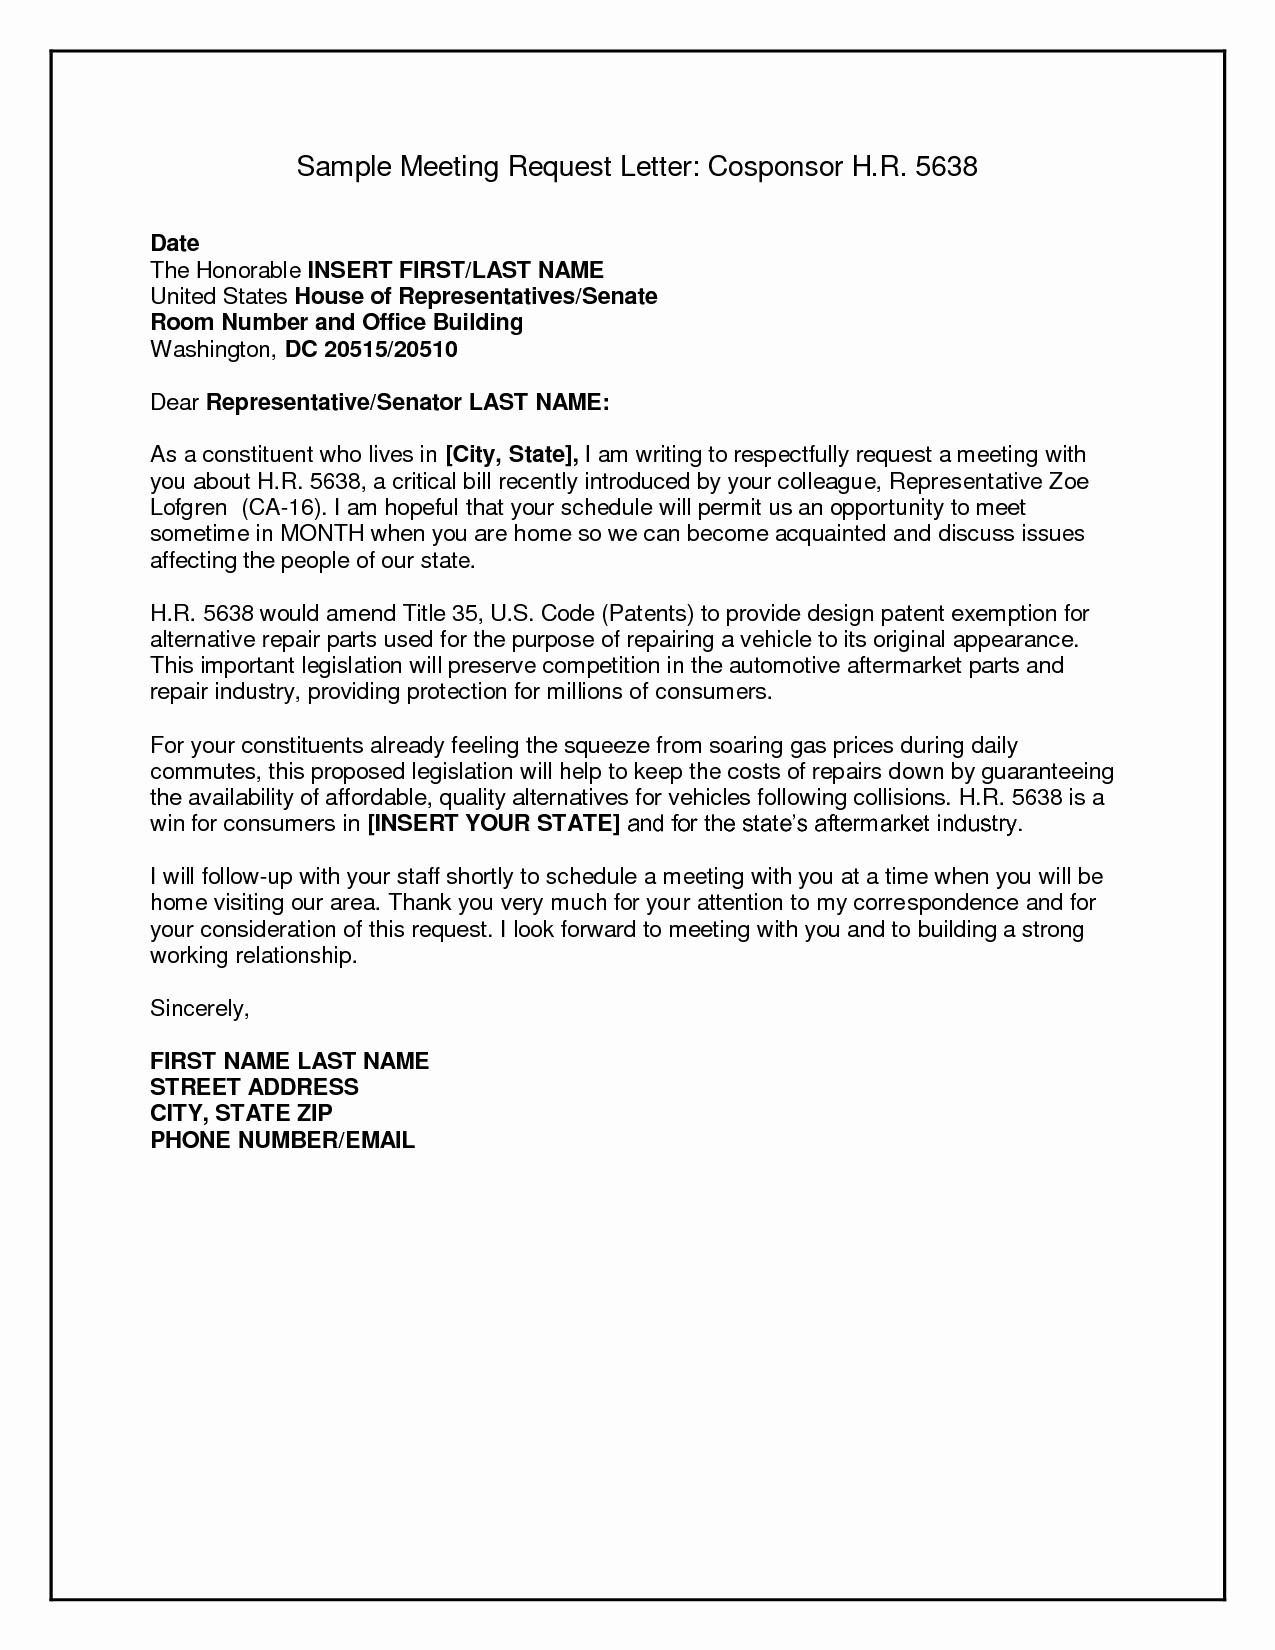 Business Letter Format Ireland New Sample Request Meeting Via Email Document